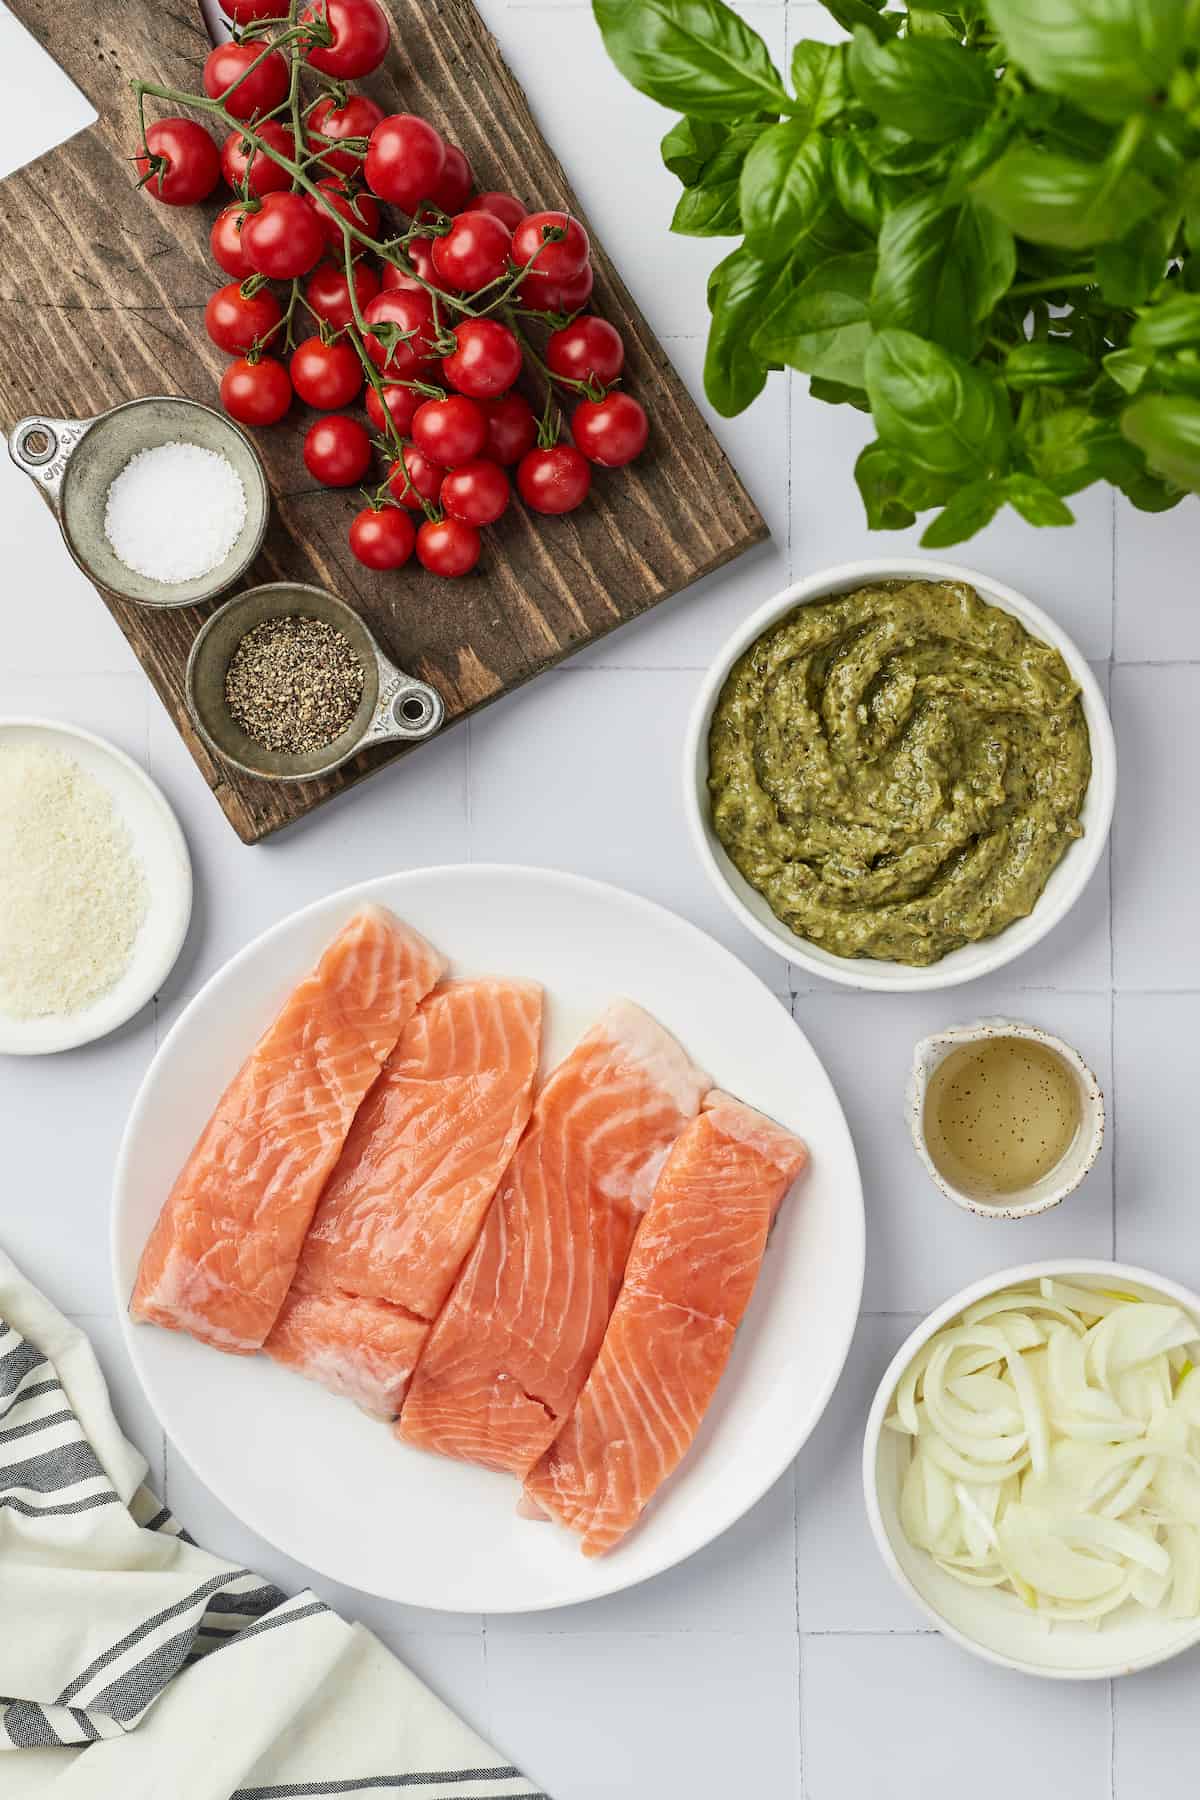 Overhead view of ingredients for baked pesto salmon